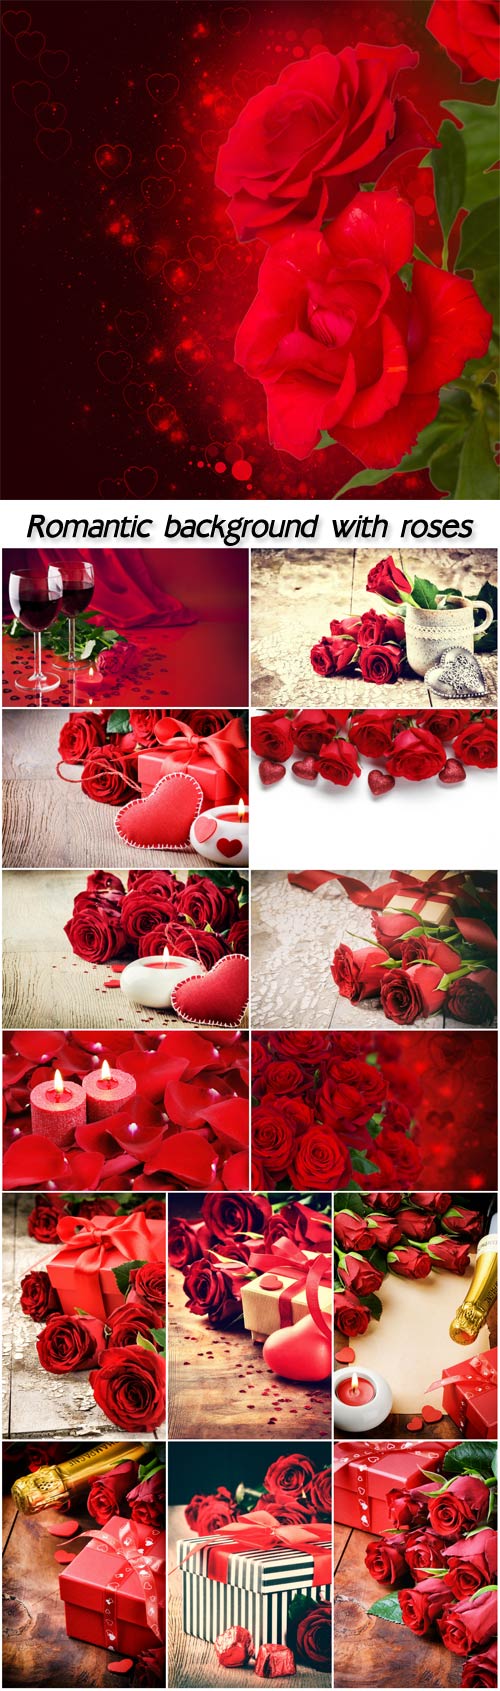 Romantic background with roses and candles, Valentine's Day